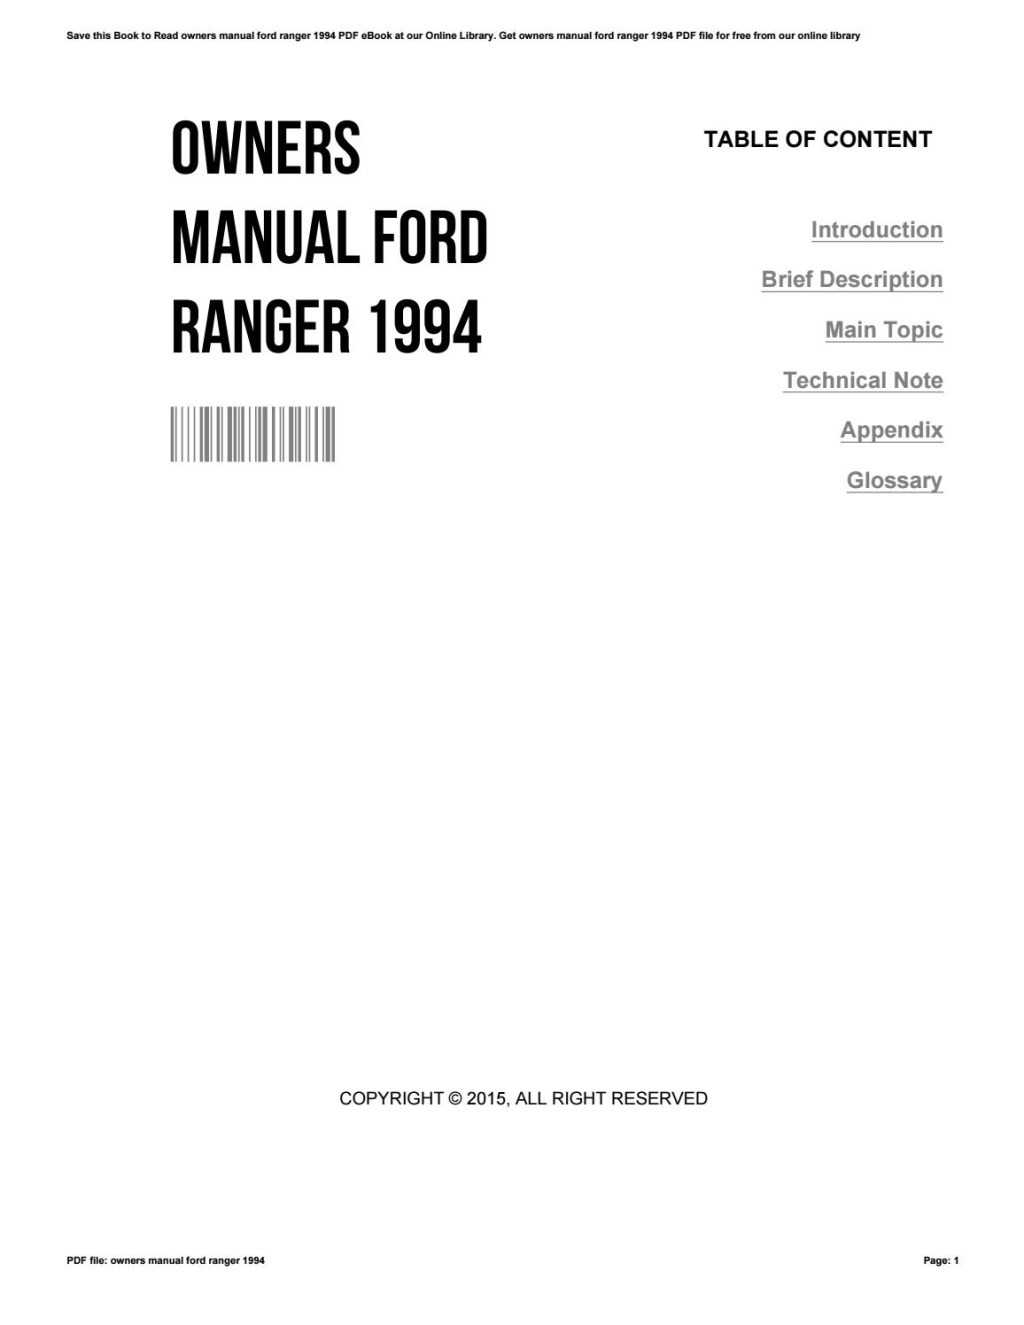 Picture of: Owners manual ford ranger  by JamesEdwards – Issuu